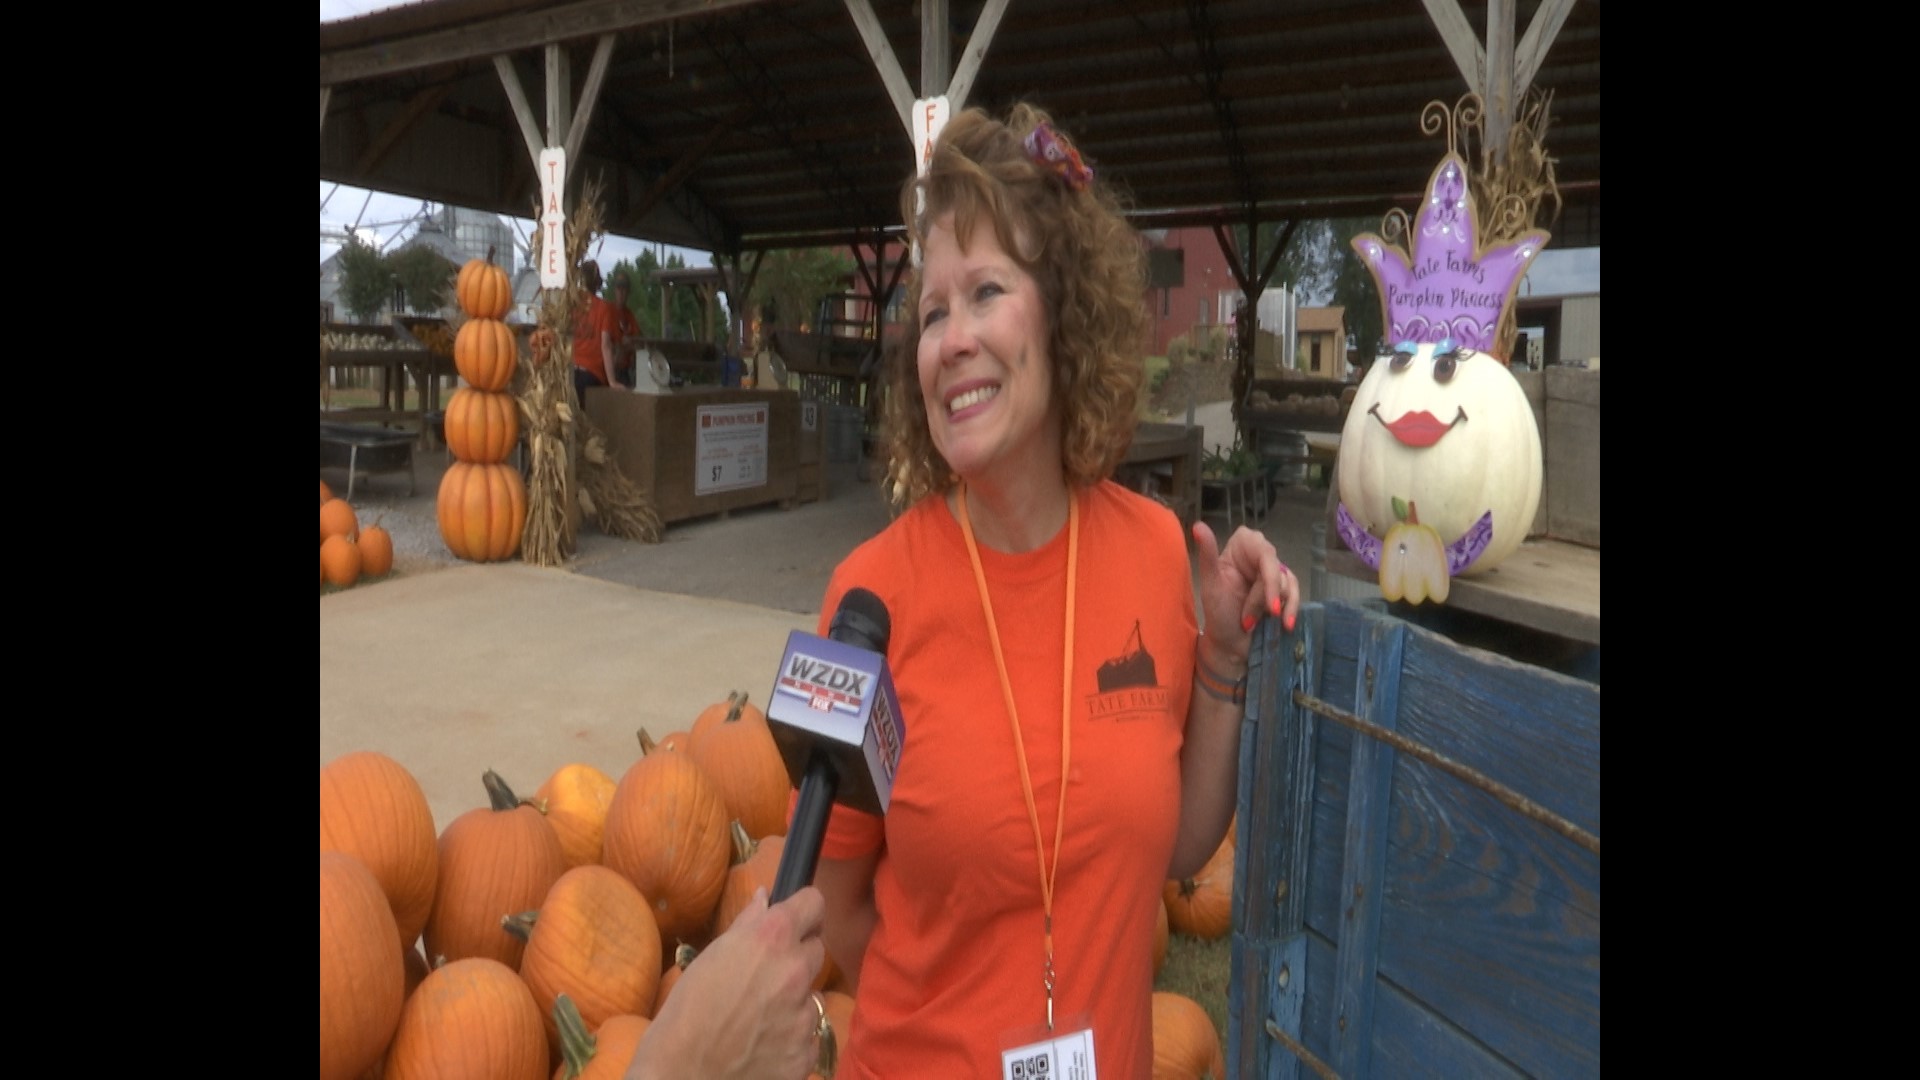 It’s officially fall and that means it’s officially pumpkin picking season at Tate Farms.